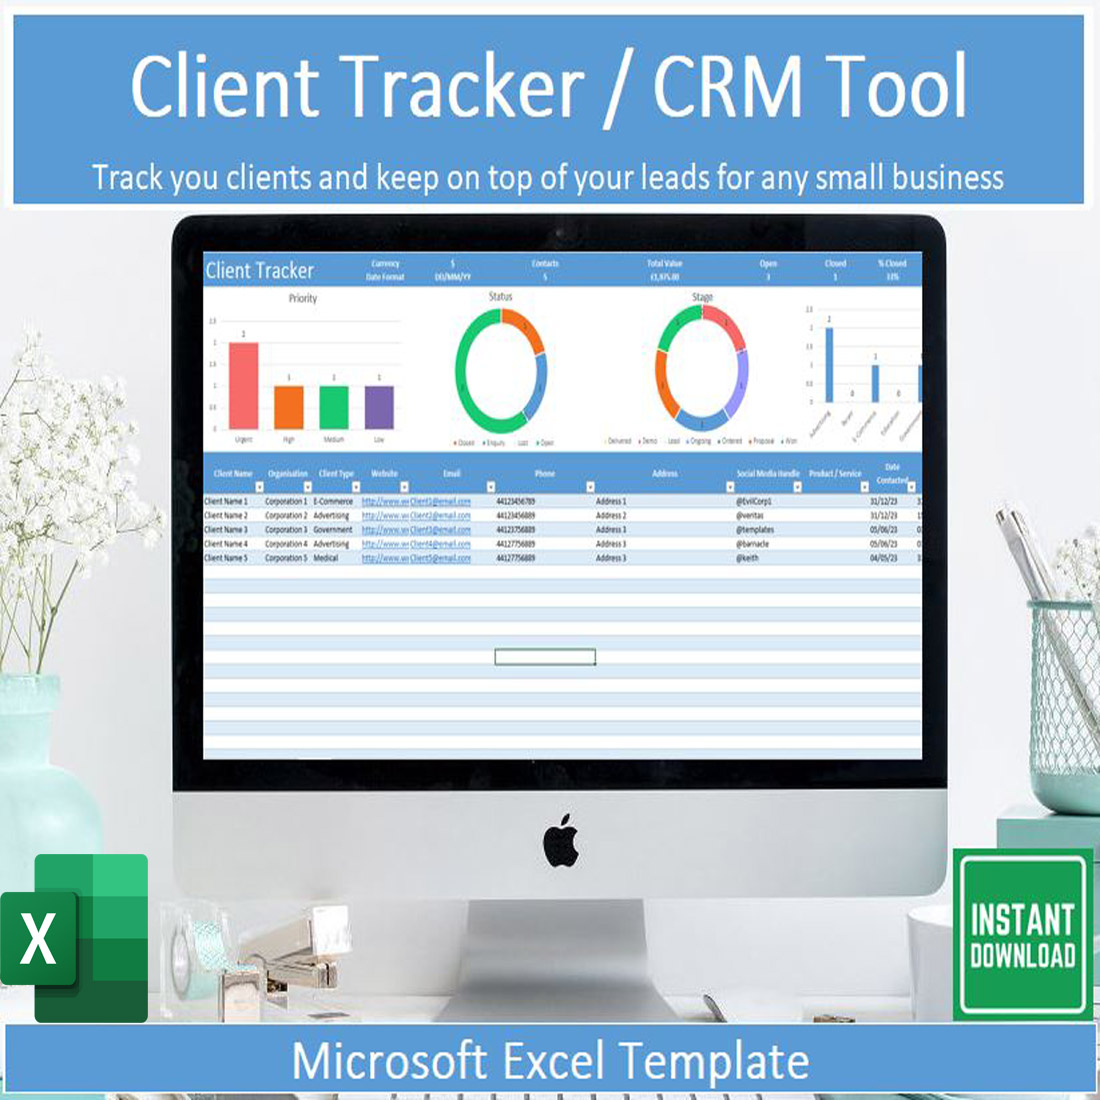 Client Tracker CRM Spreadsheet for Microsoft Excel cover image.